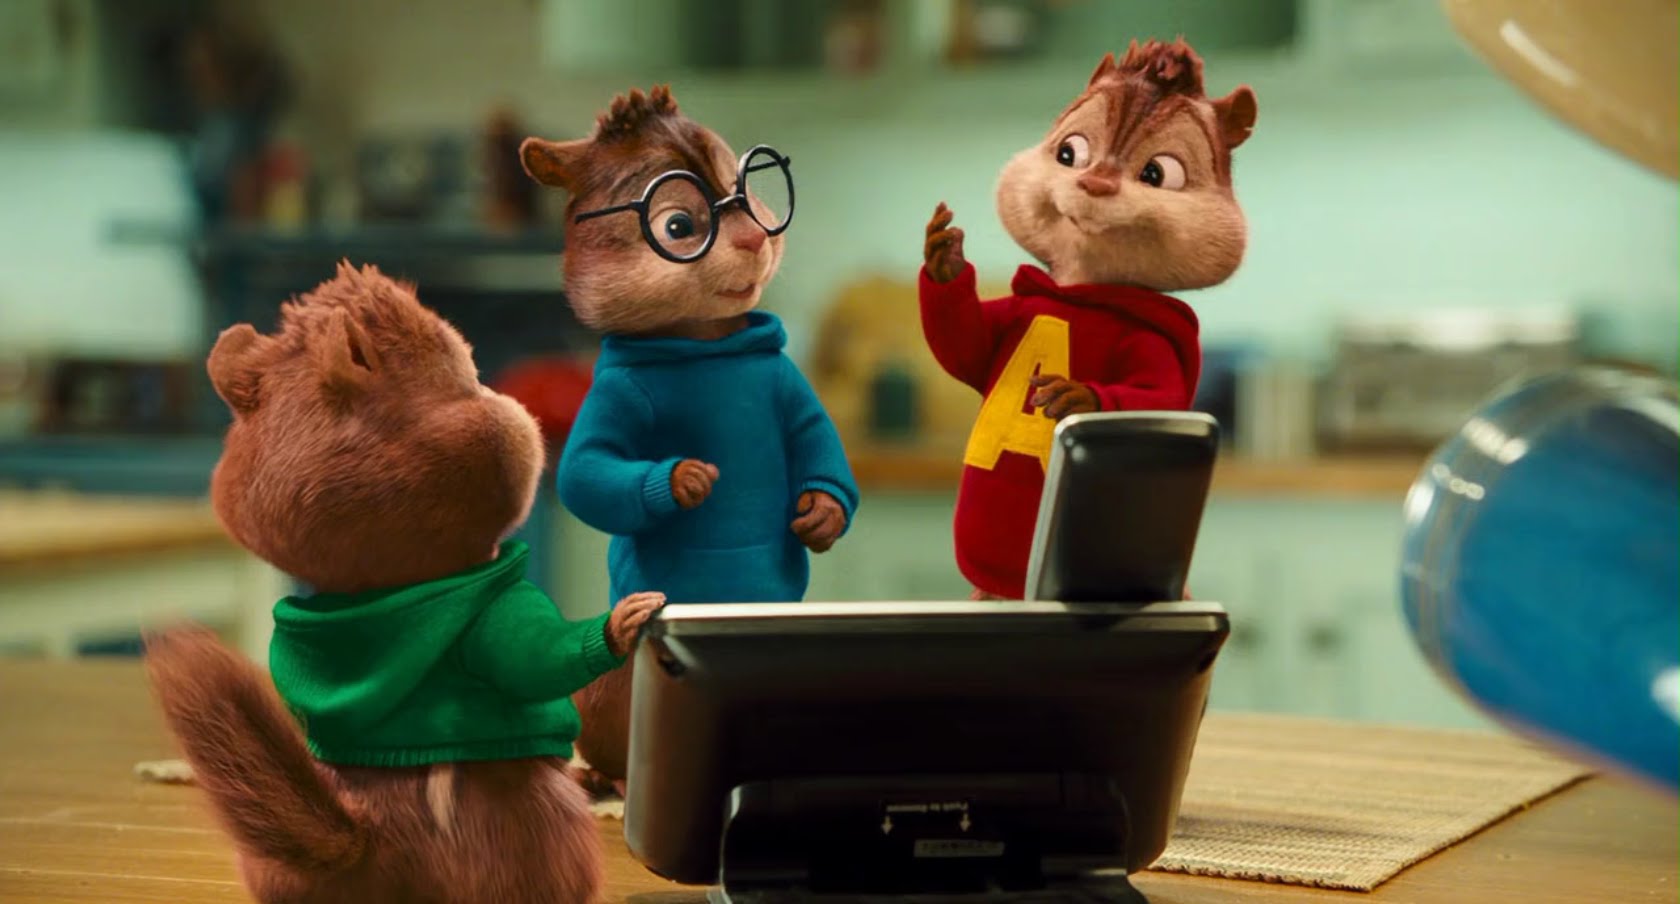 Nice Images Collection: Alvin And The Chipmunks: The Squeakquel Desktop Wallpapers